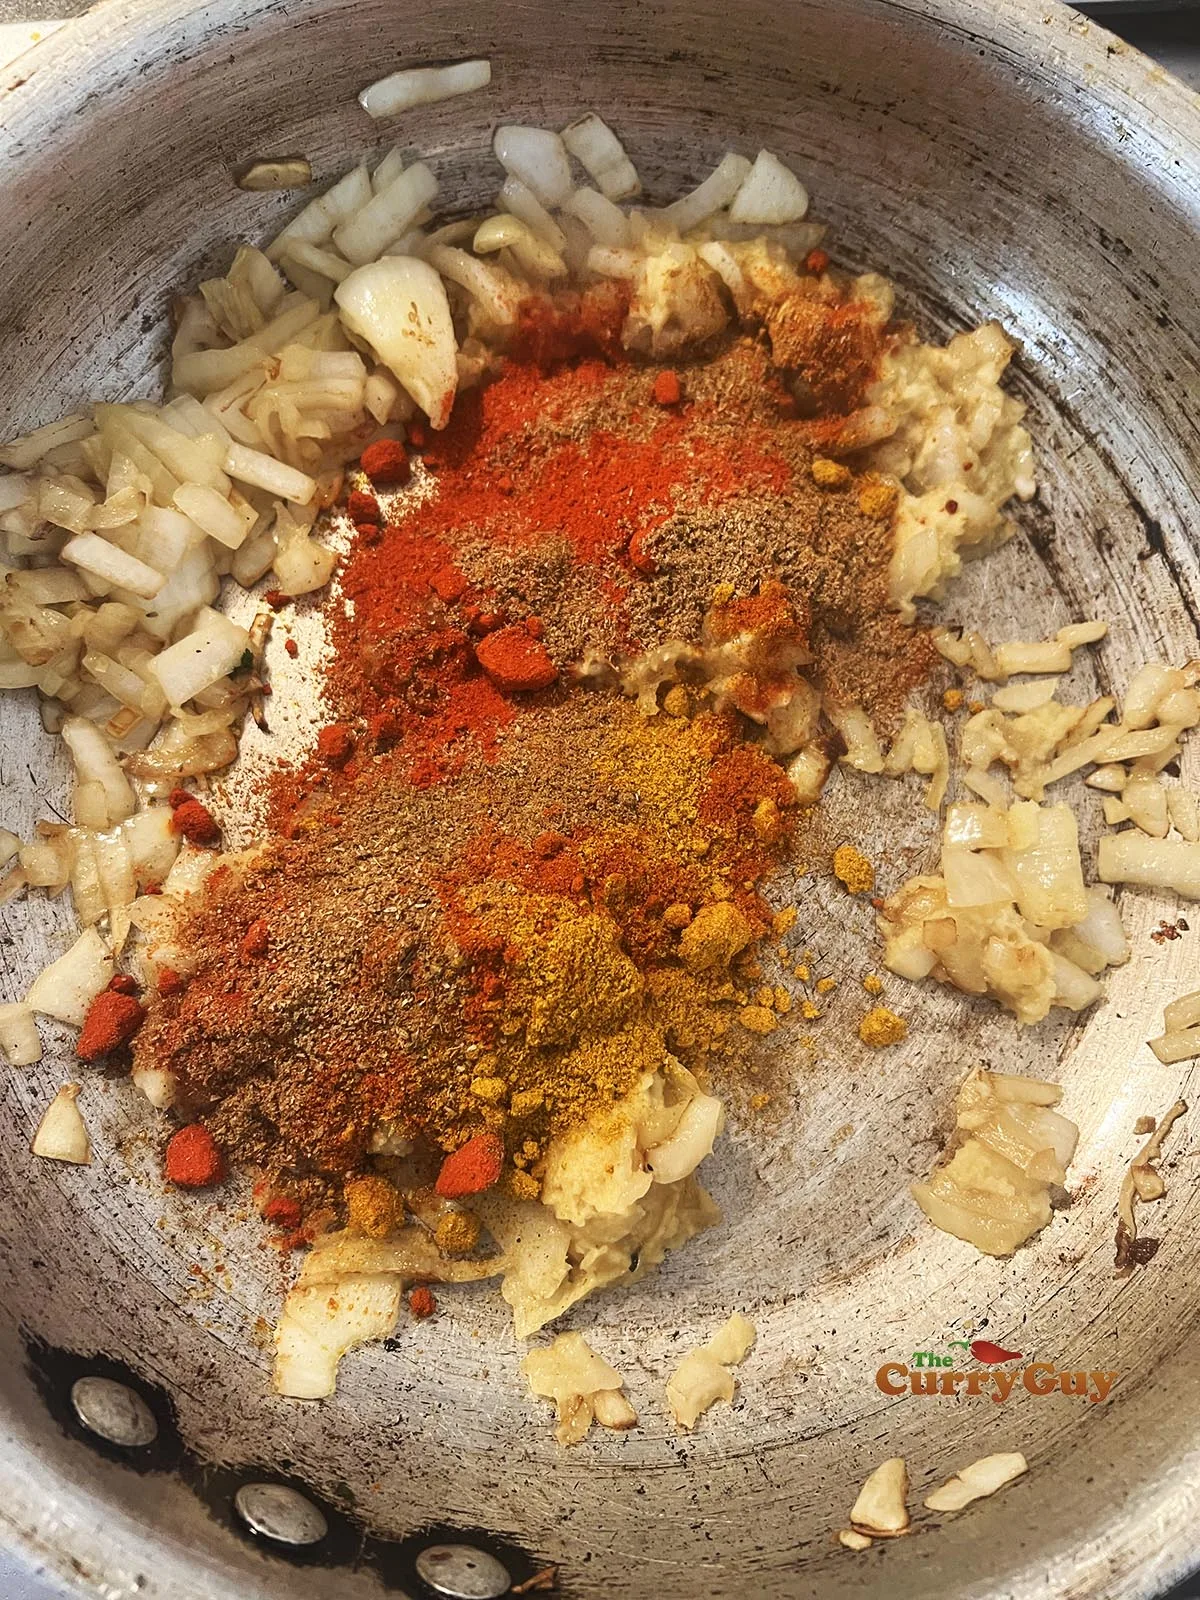 Adding ground spices to the pan